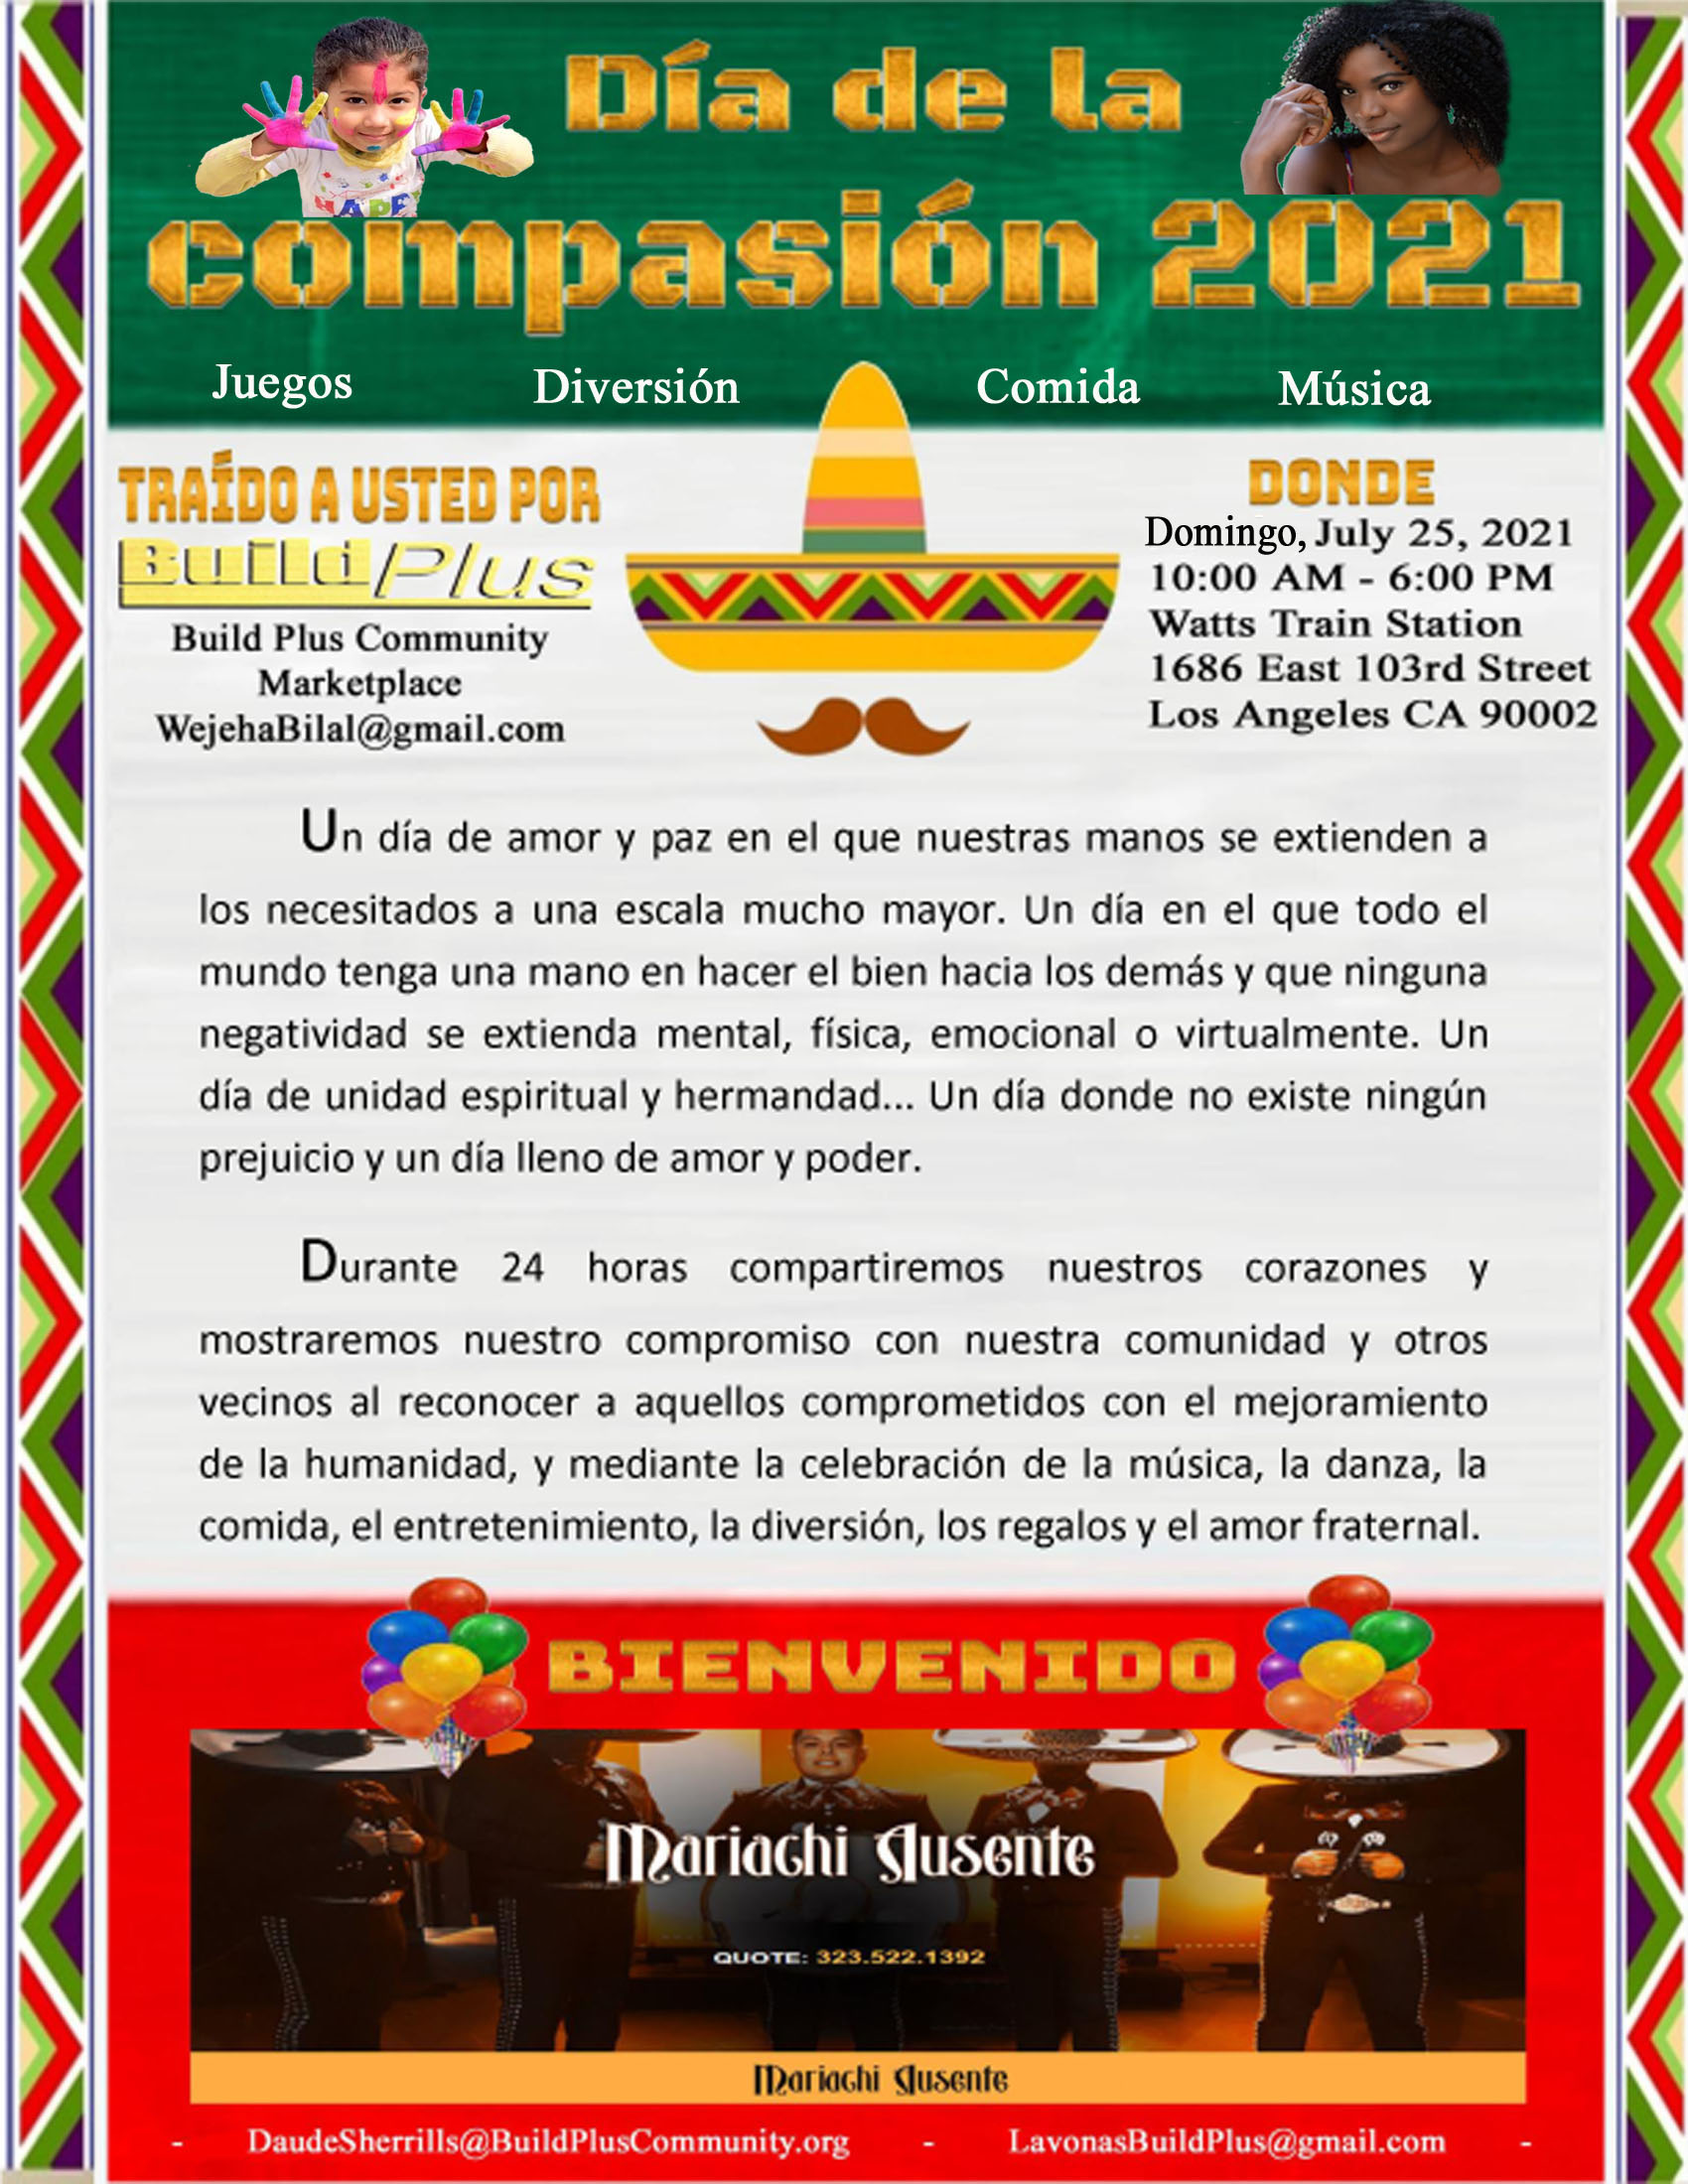 Watts Historical Train Station Celebration for Days of Compassion event flyer in Spanish